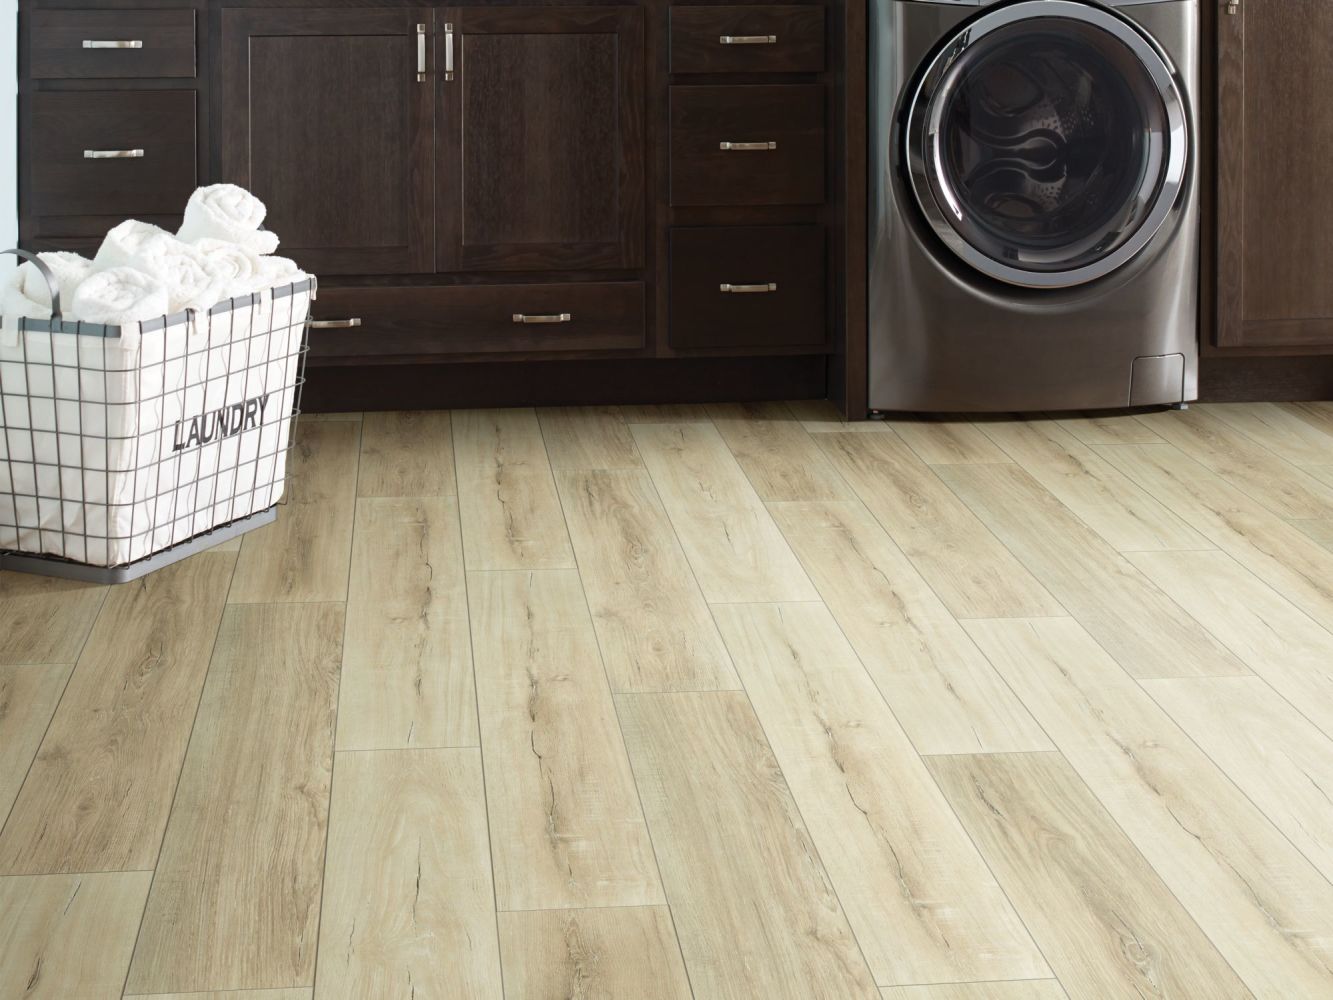 Shaw Floors Resilient Property Solutions Bonafide Hd+accent Driftwood 01053_VE427